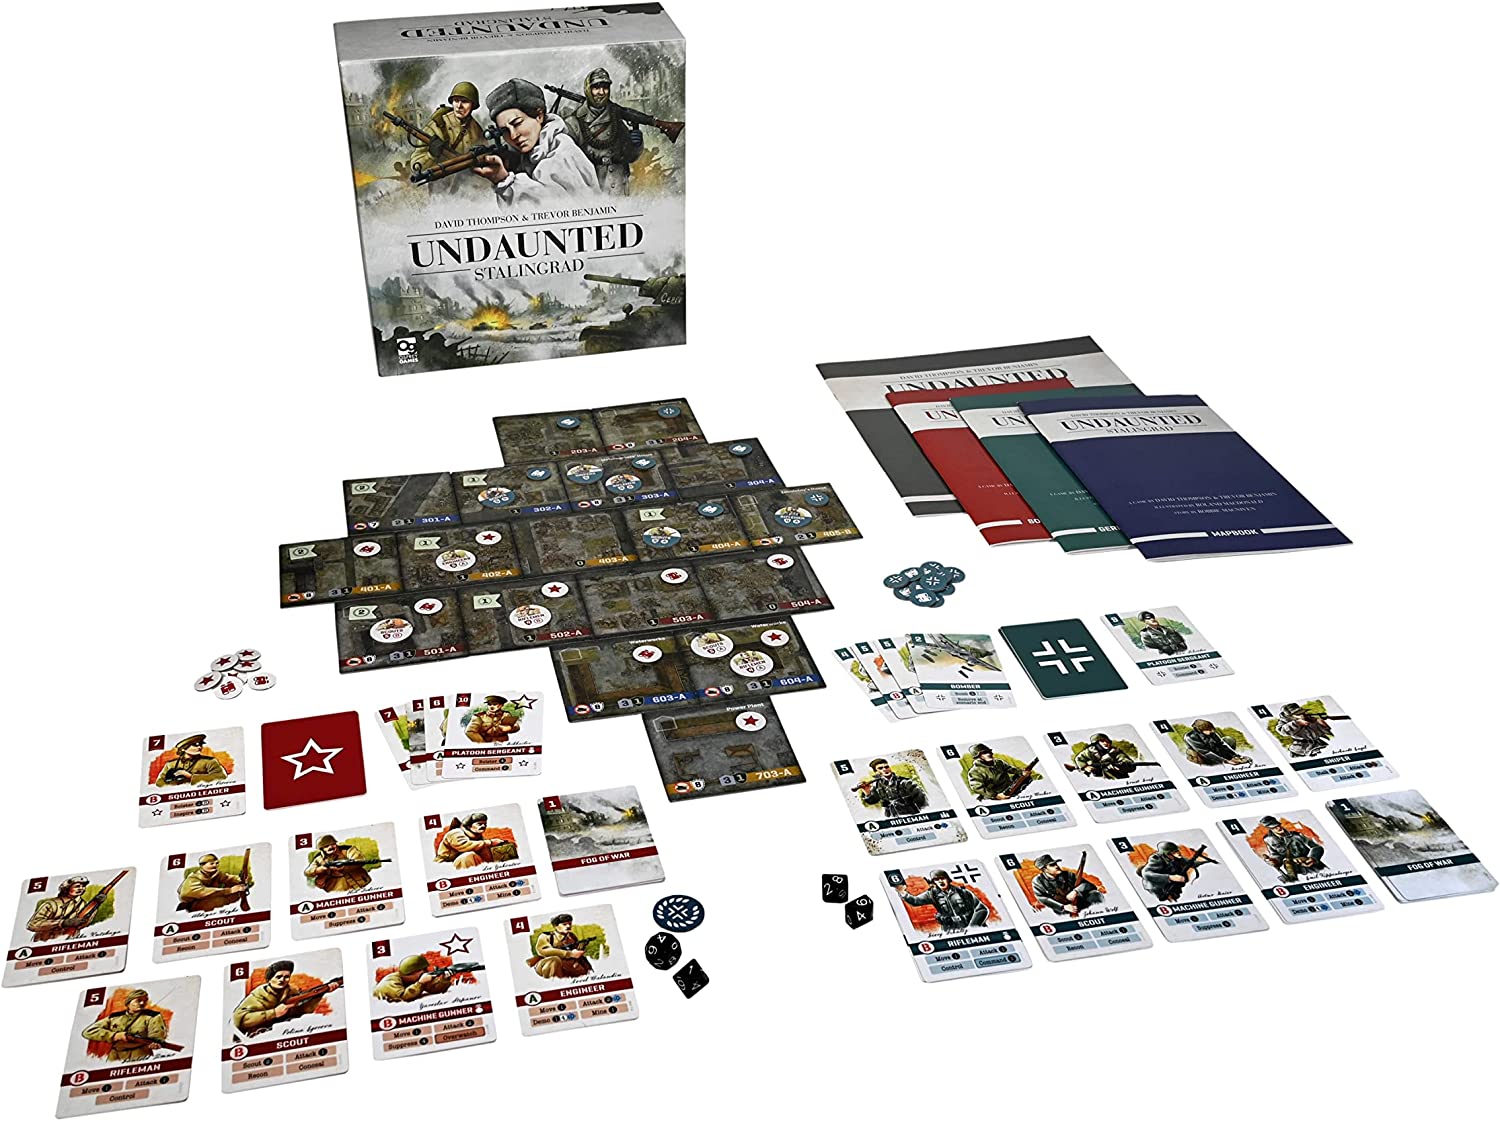 Components from Undaunted: Stalingrad.